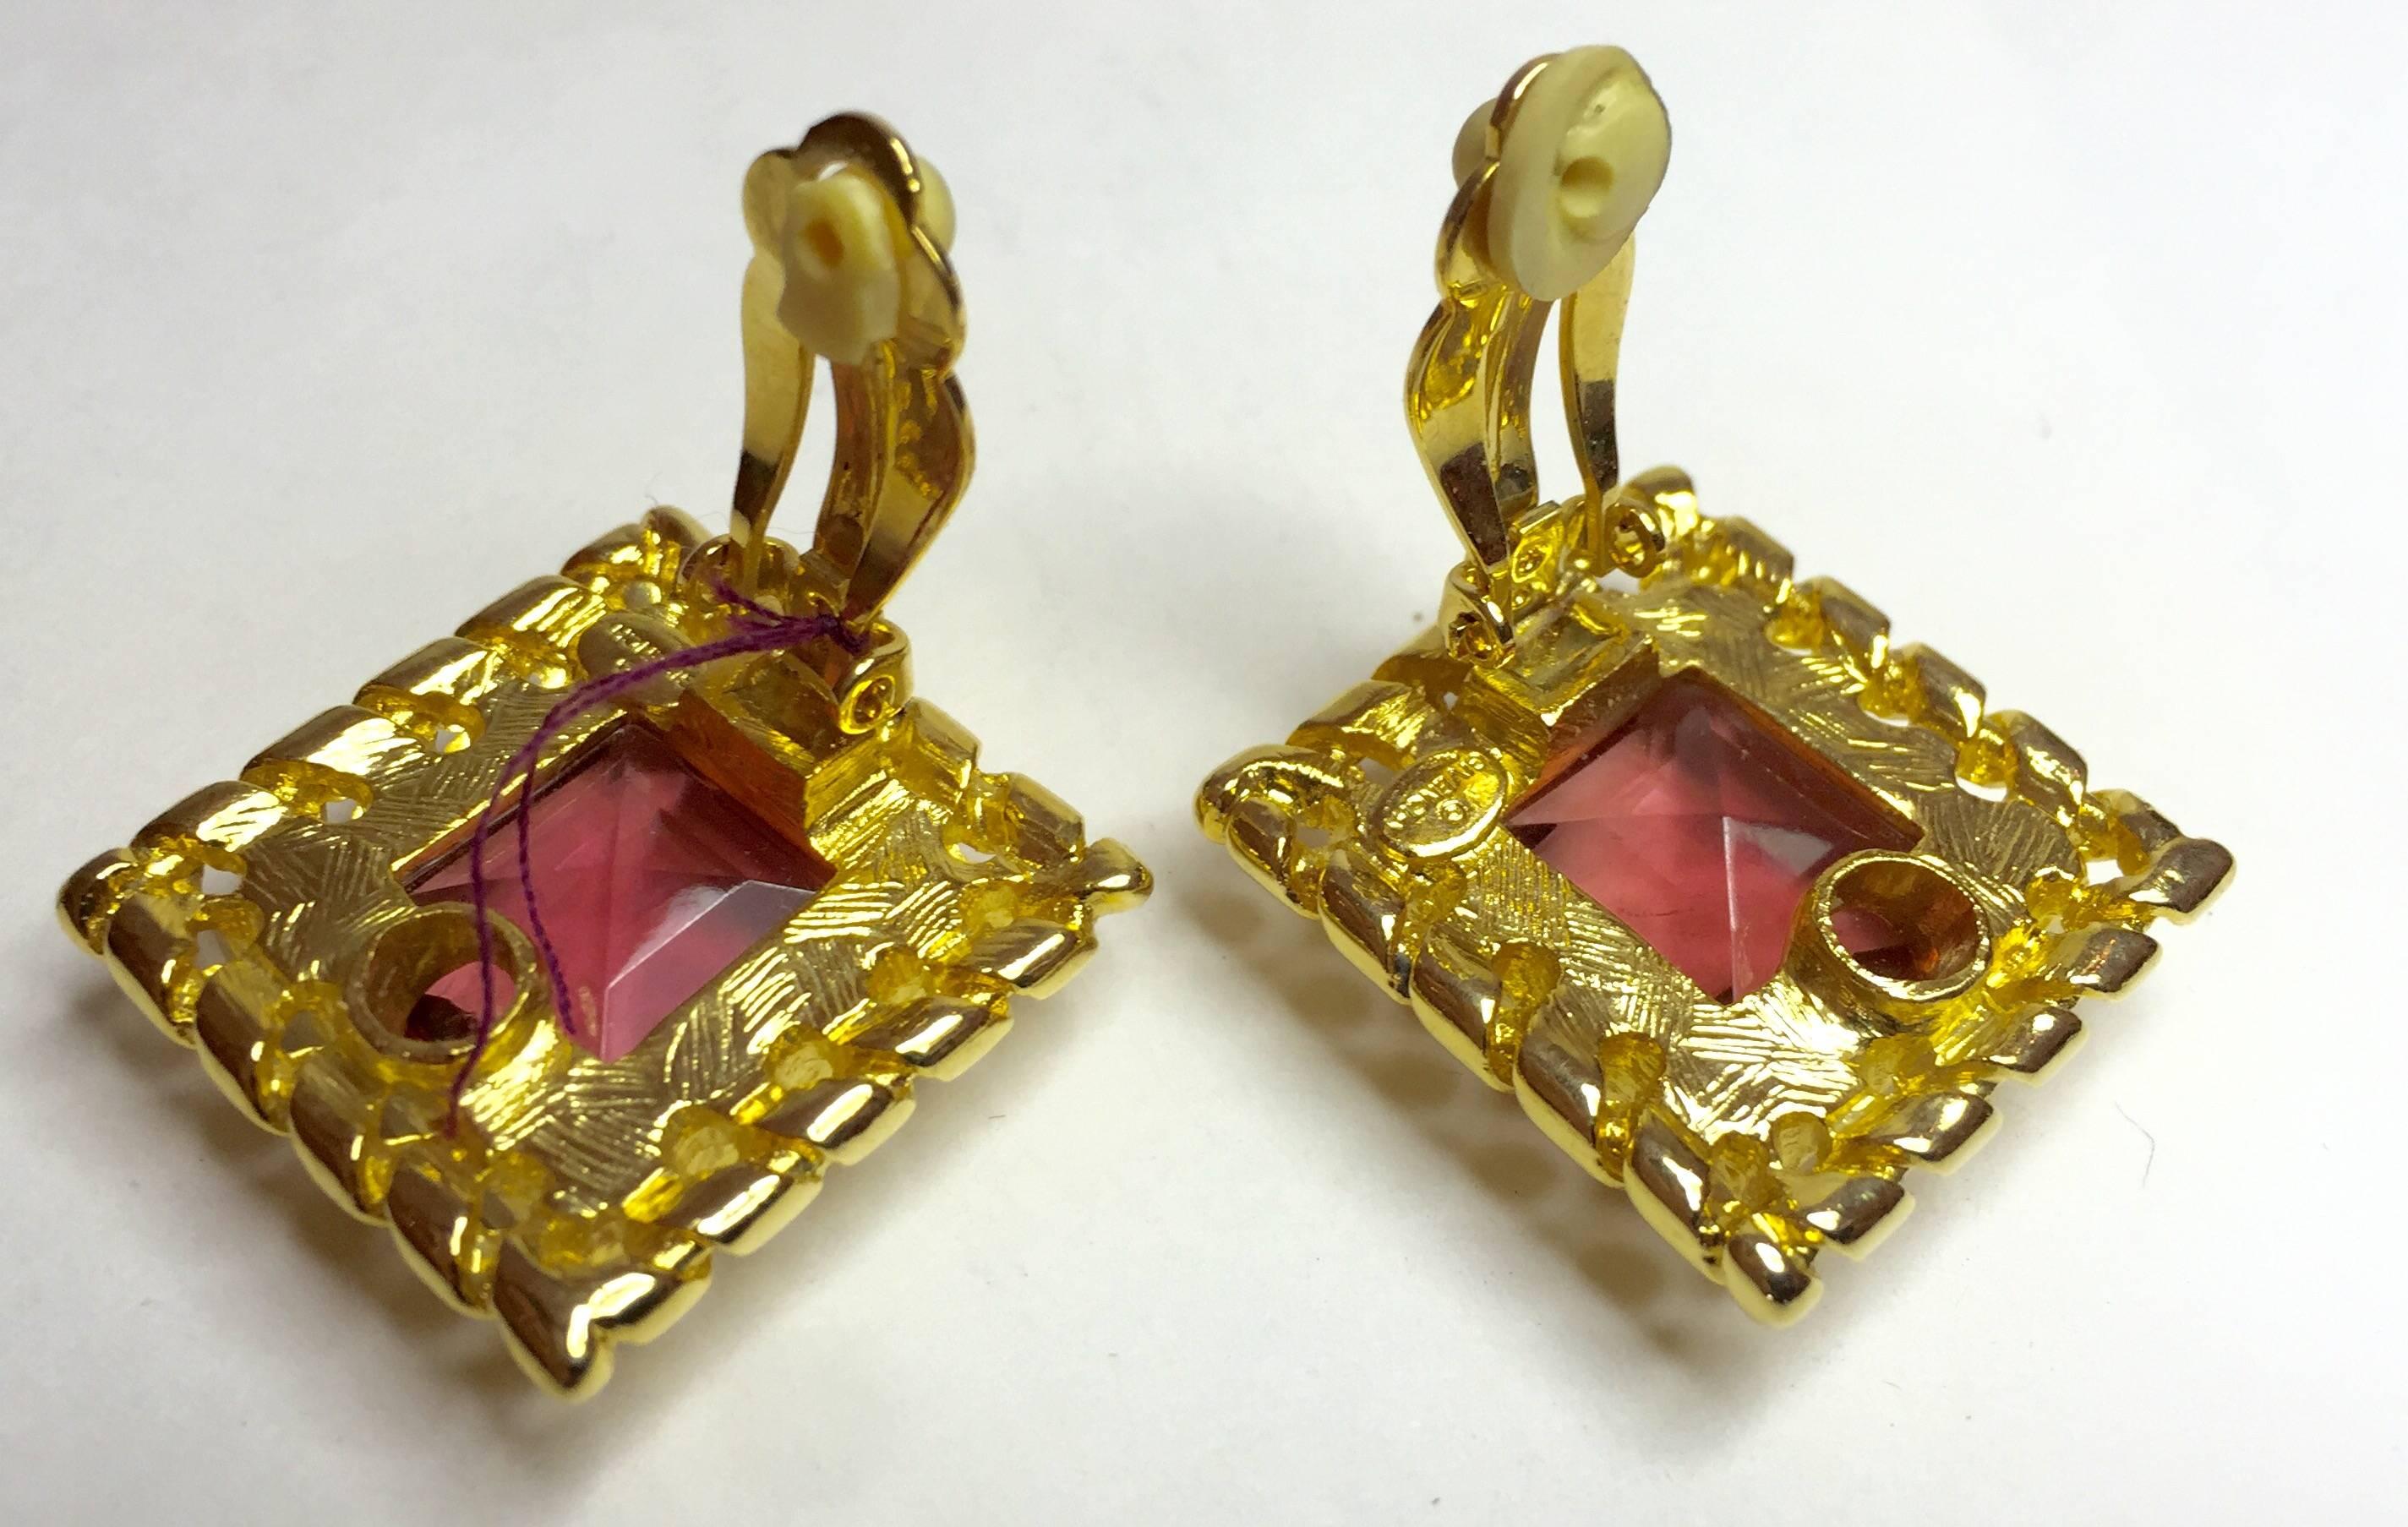 These lovely 1980s GIVENCHY clip on earrings are sleek and tailored goldtone metal, with luscious pink crystal square cut stonework. Faceted, brilliant and bright, the clip on earring mechanism is original and functions perfectly. The frame appears